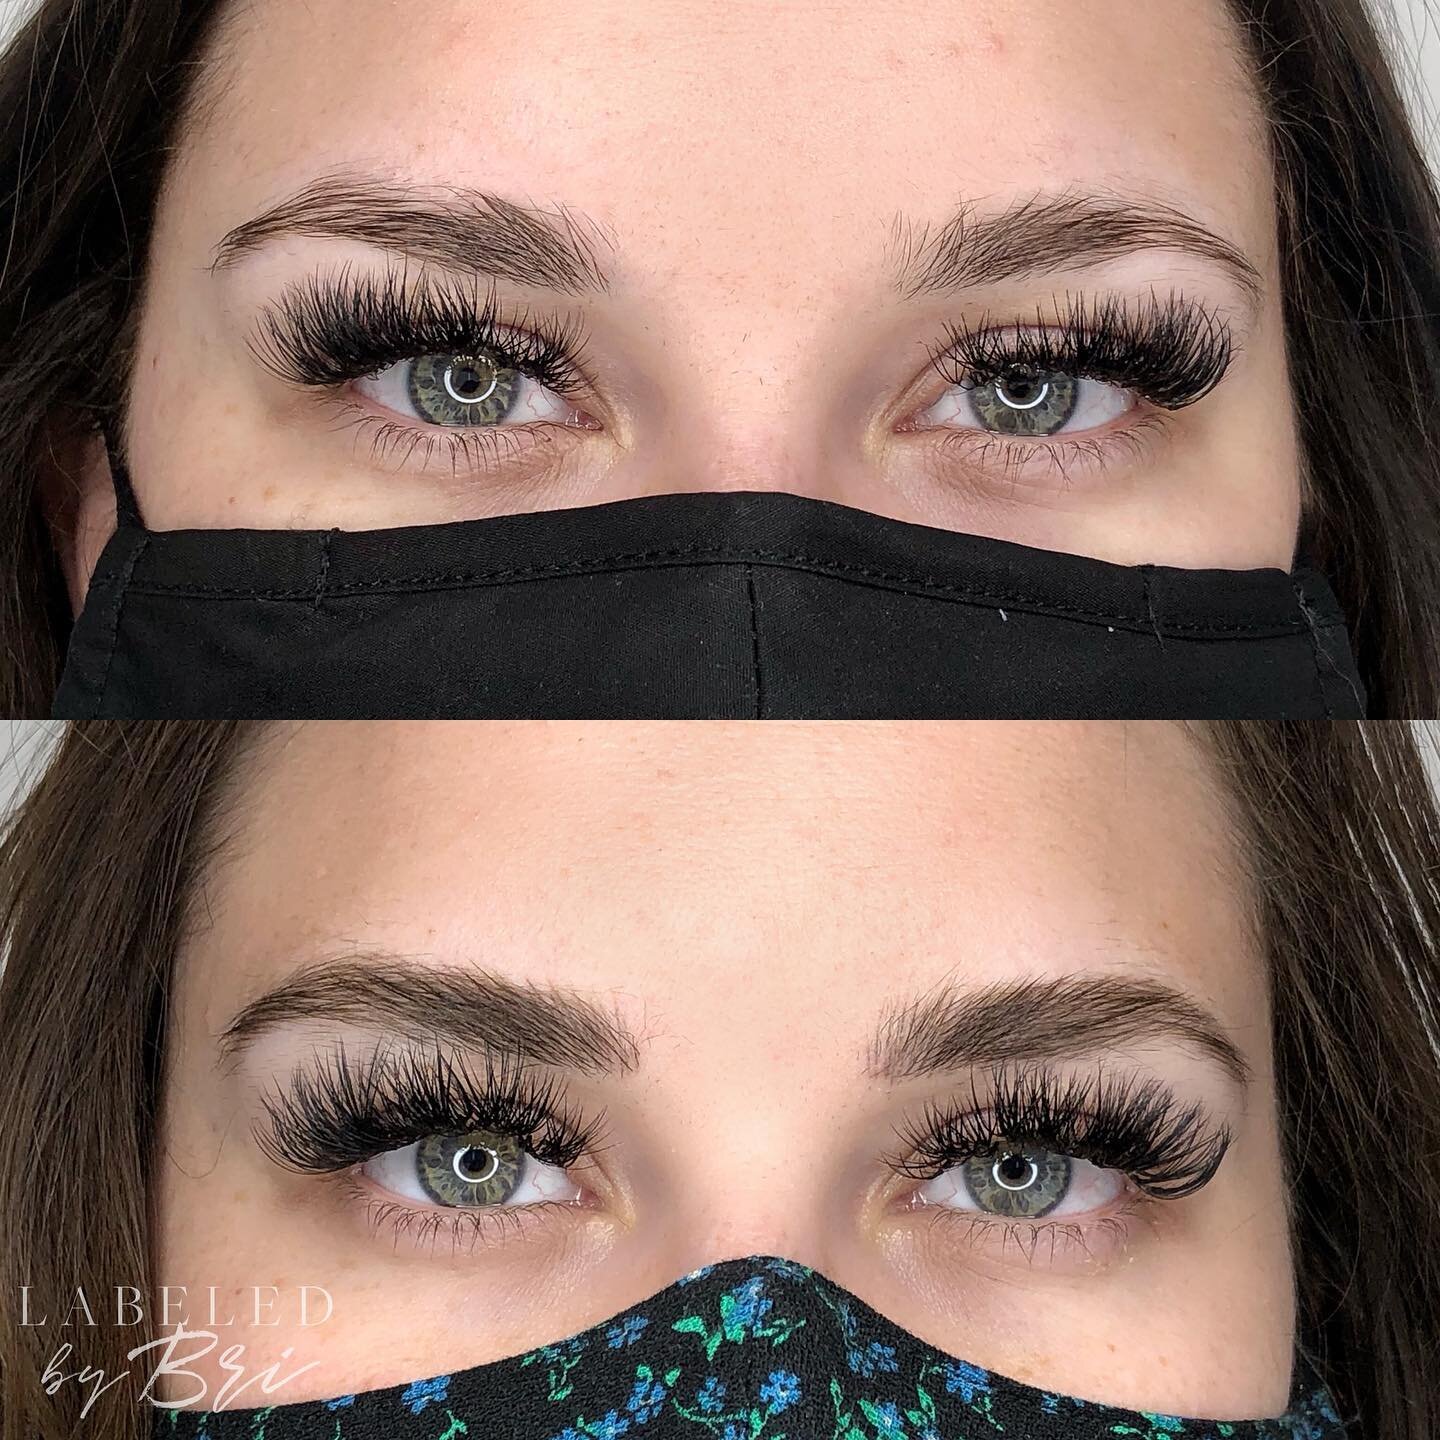 Before + healed (one session) soft and natural microblading.

This is one dedicated babe, she has completed a 7 hour drive for her brows not once, but twice! But now she has new frames for those gorgeous eyes that won&rsquo;t require a touchup for an